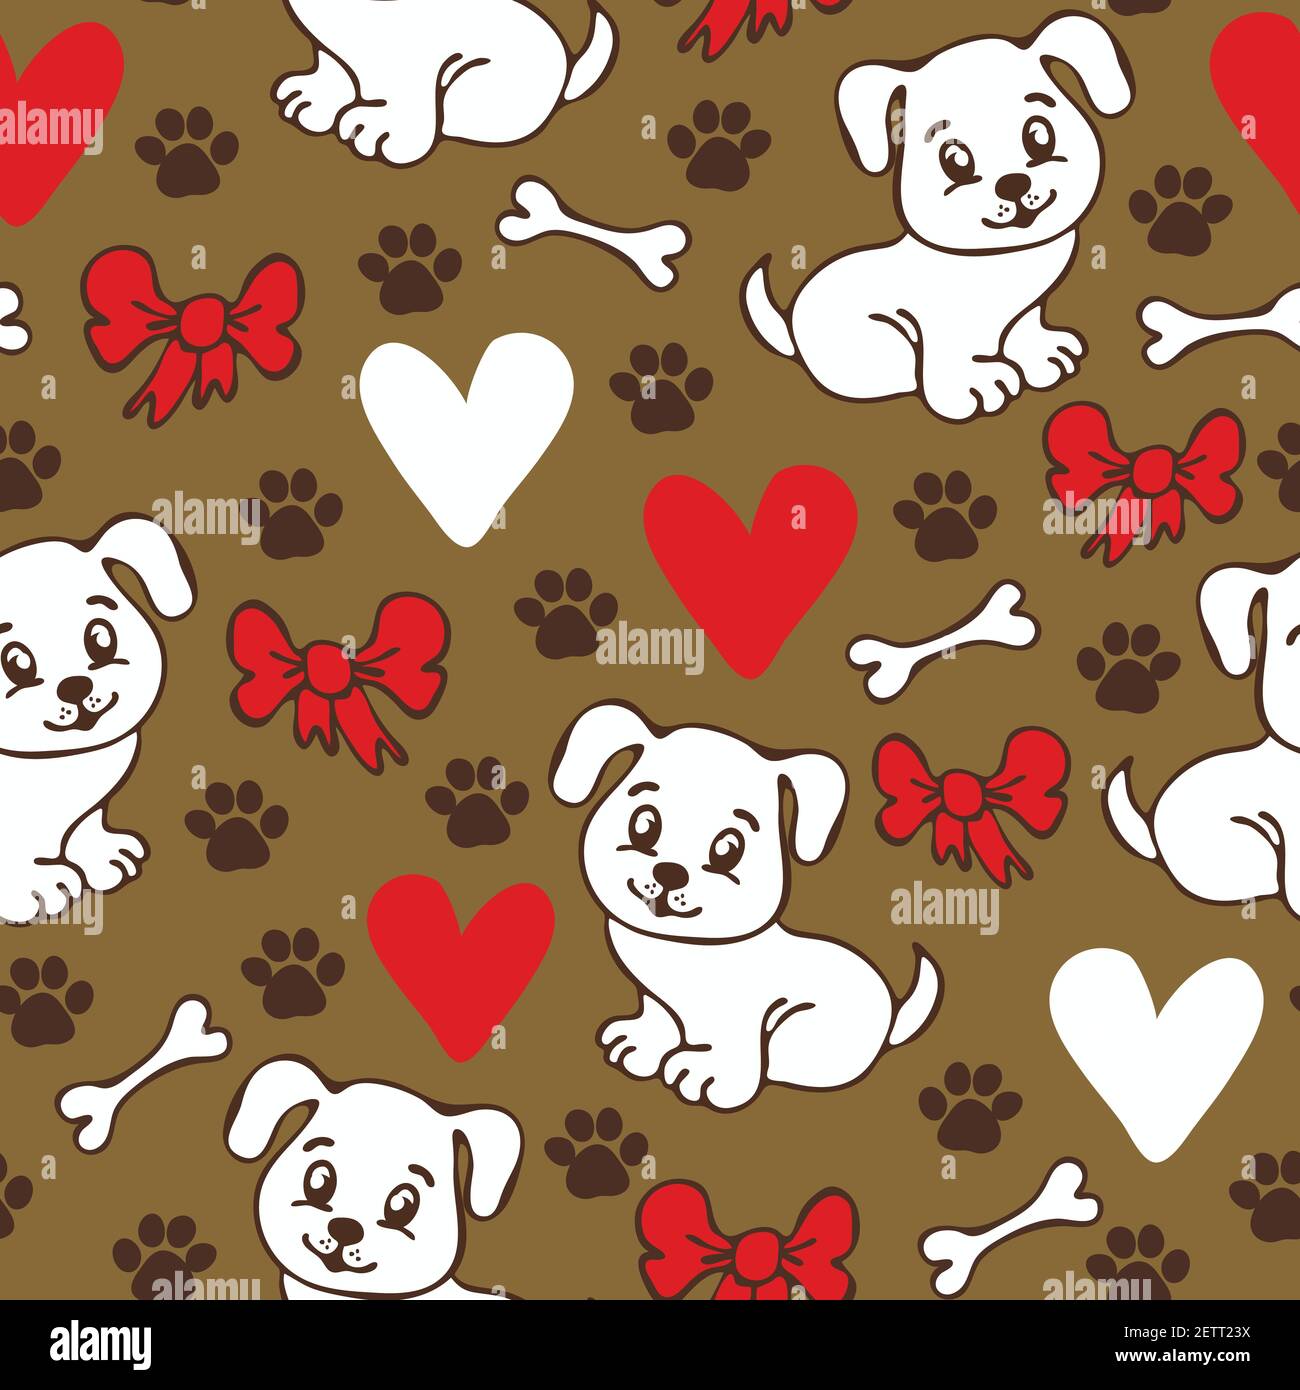 Seamless vector pattern with dogs and love harts on brown background. Animal wallpaper design with white puppies. Stock Vector